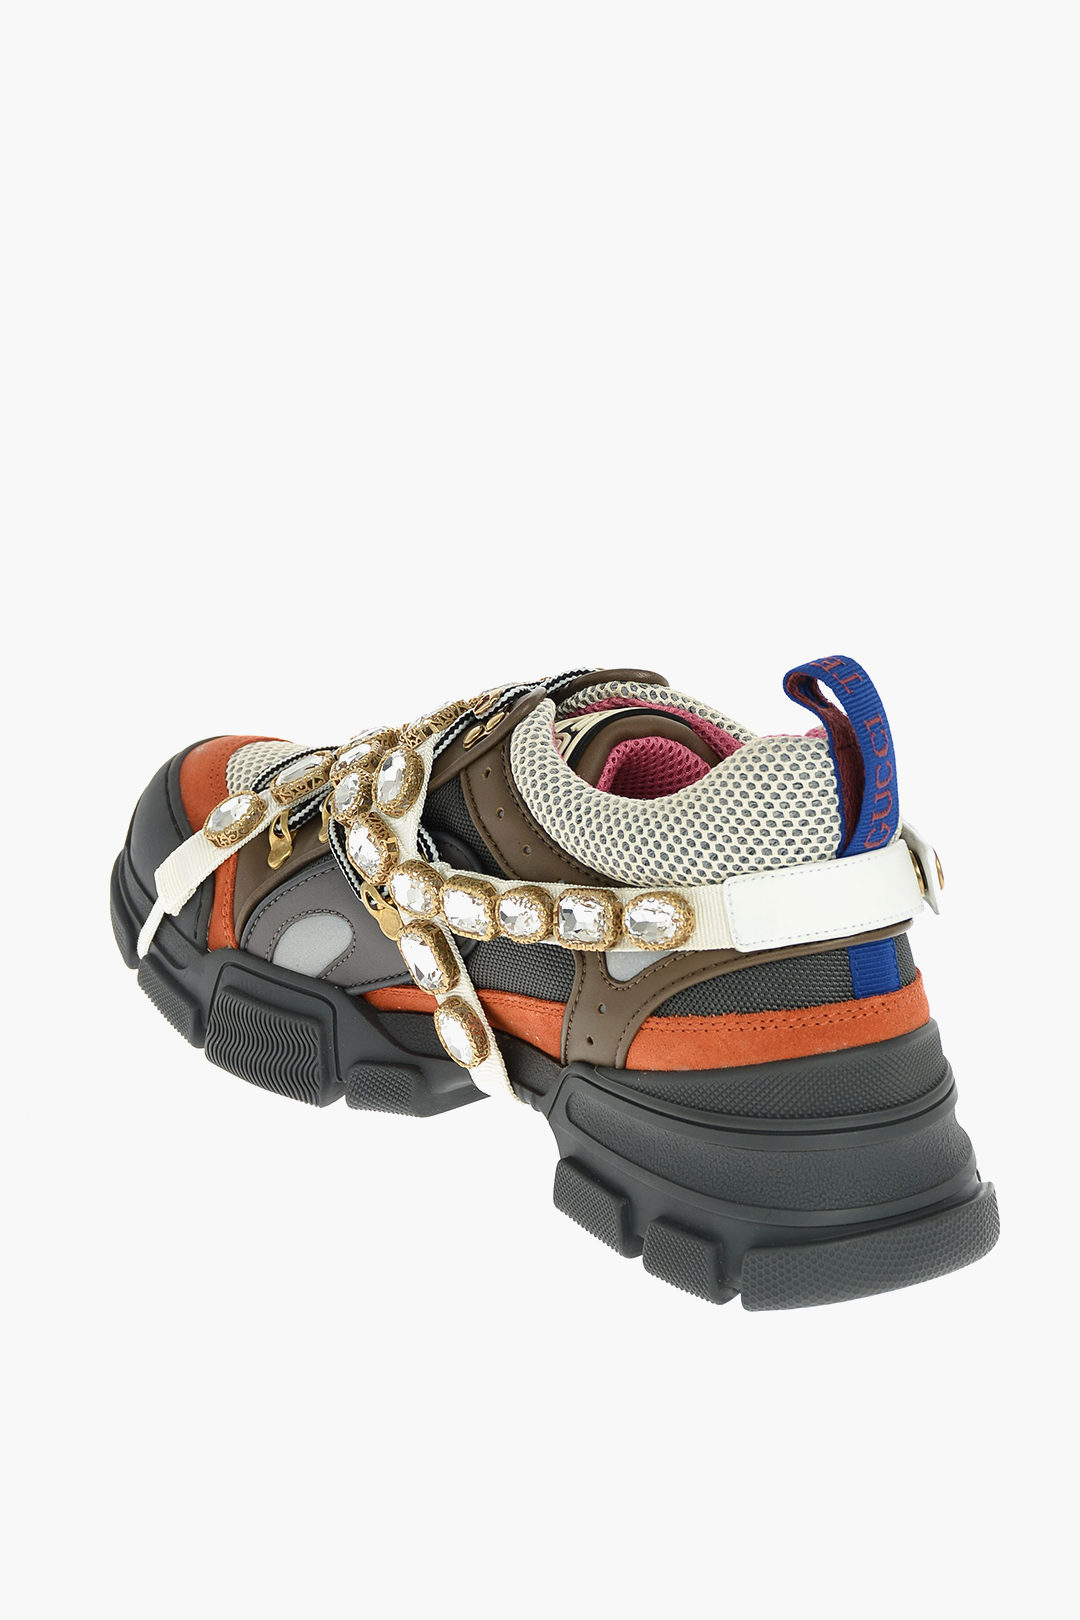 Gucci Removable Crystal Strap FLASHTRECK Multicolor Sneakers men - Glamood  Outlet